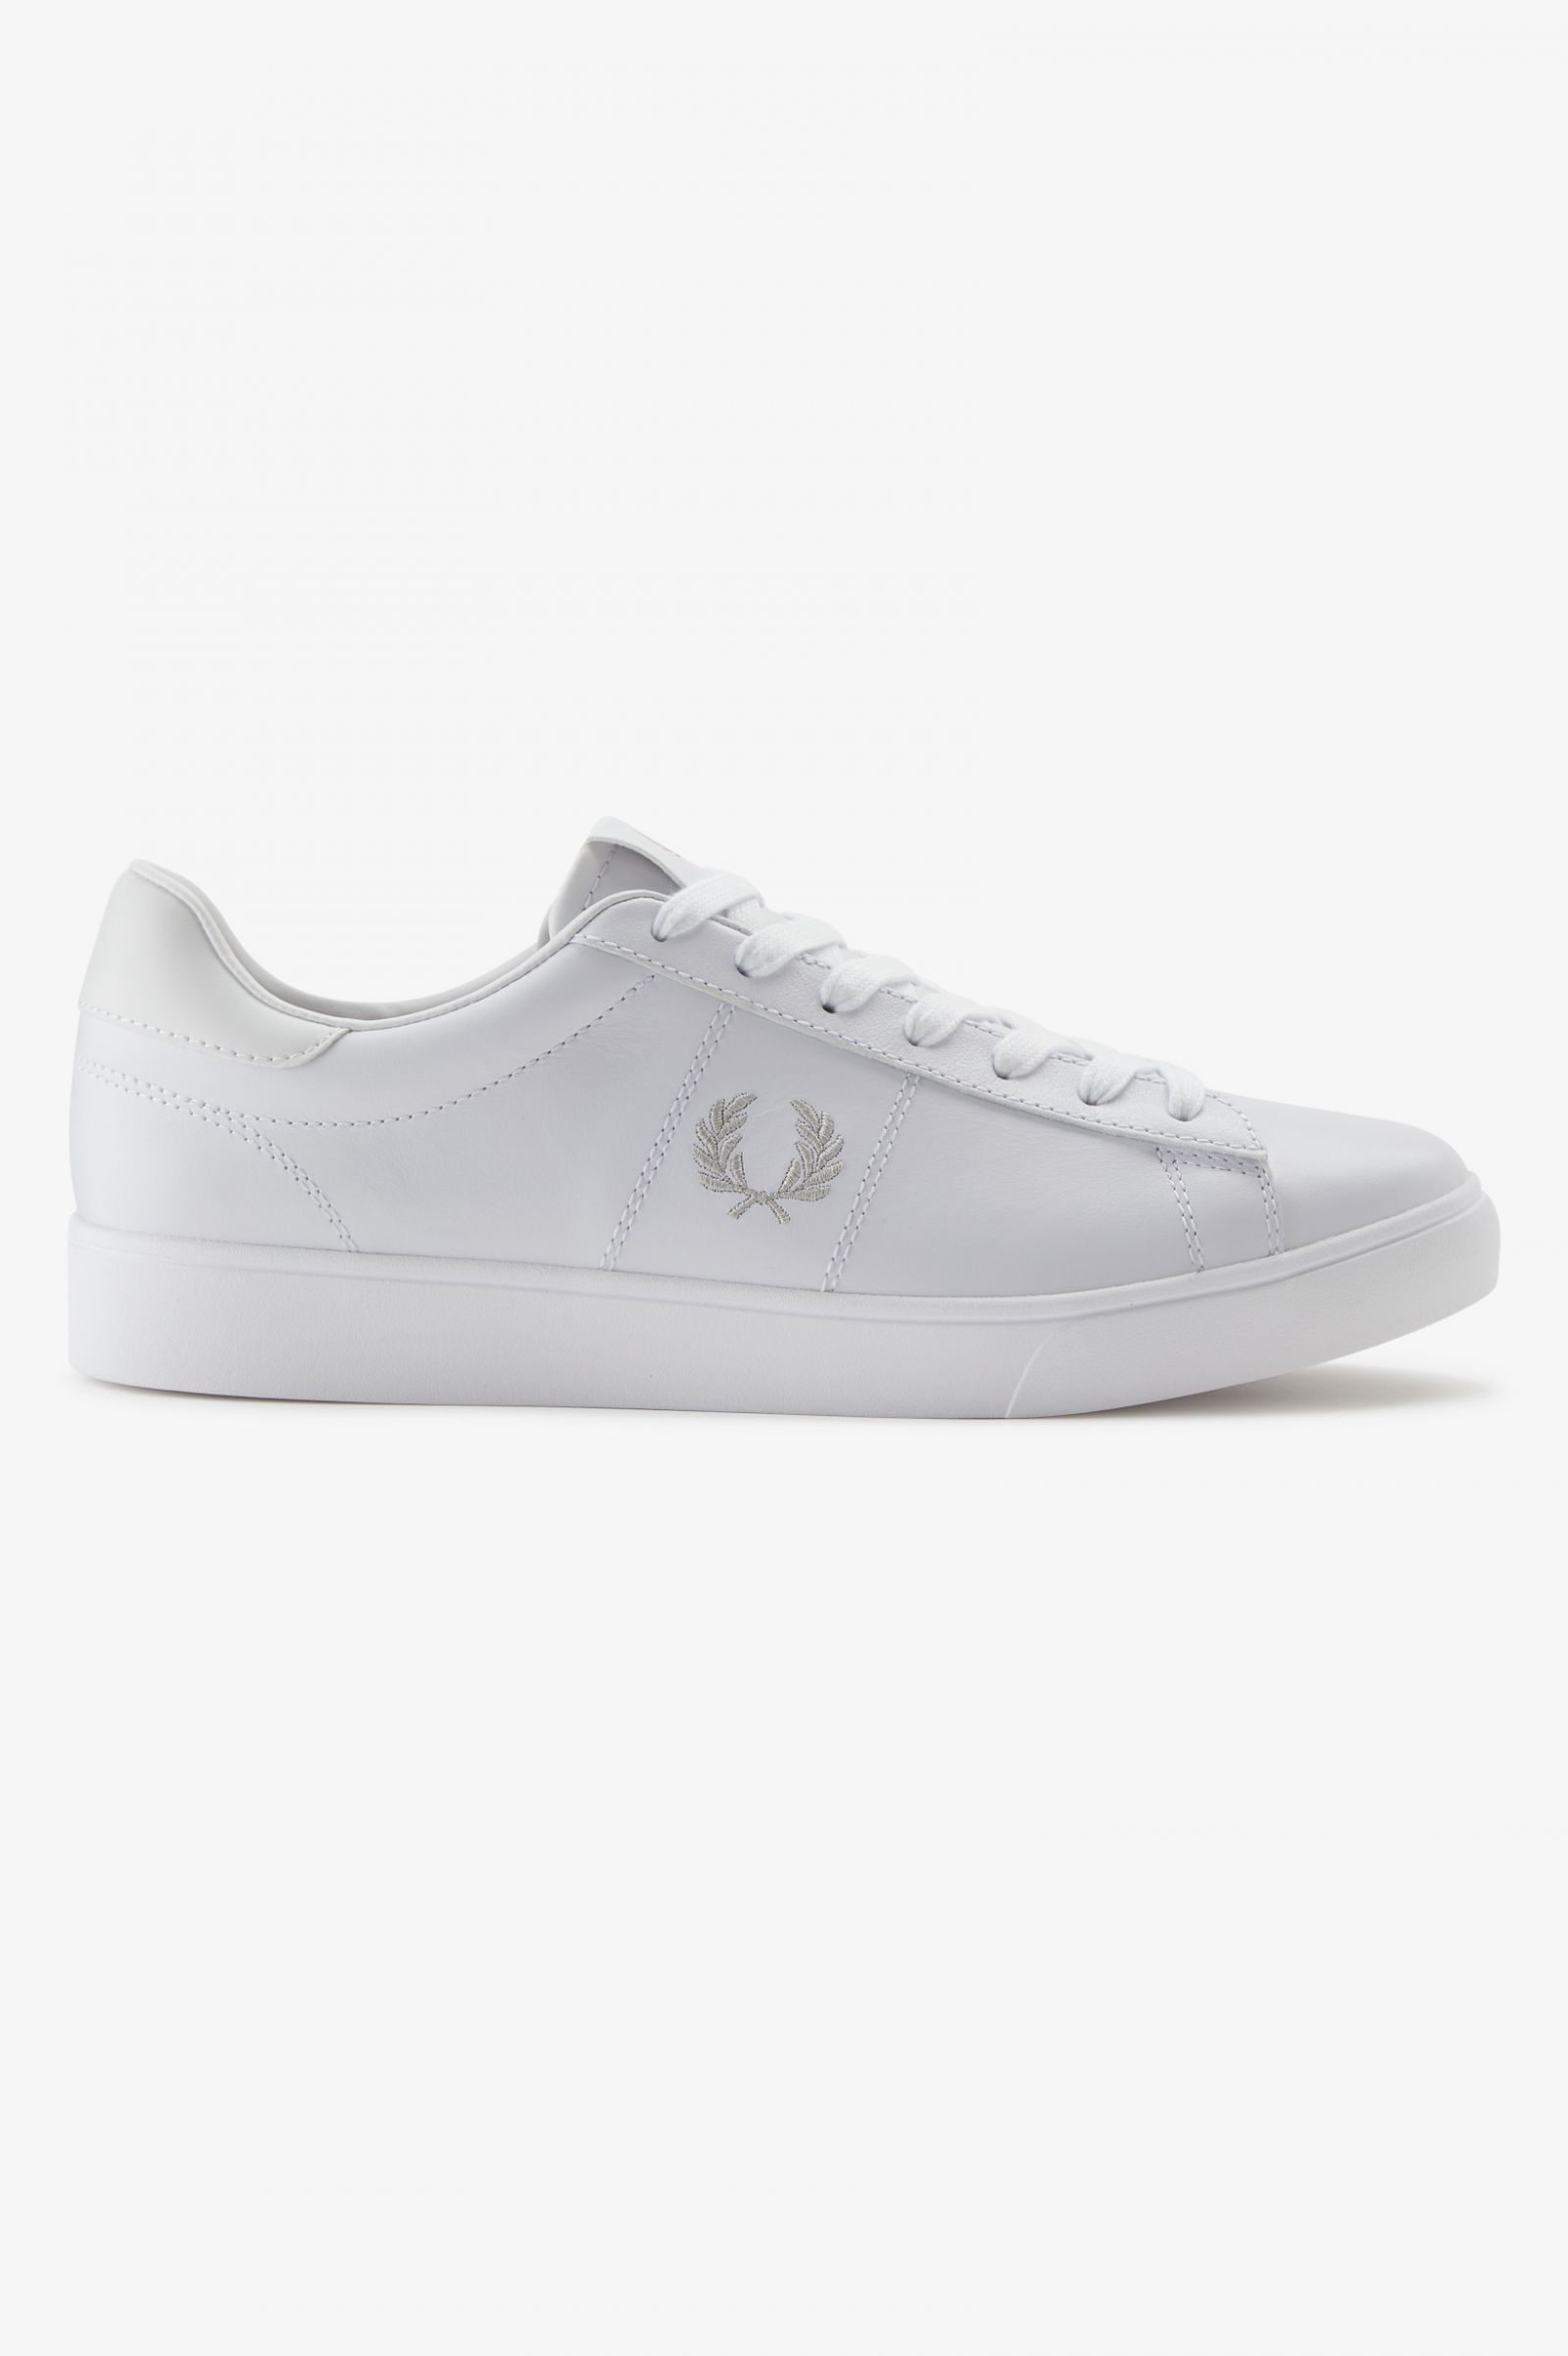 Fred perry spencer